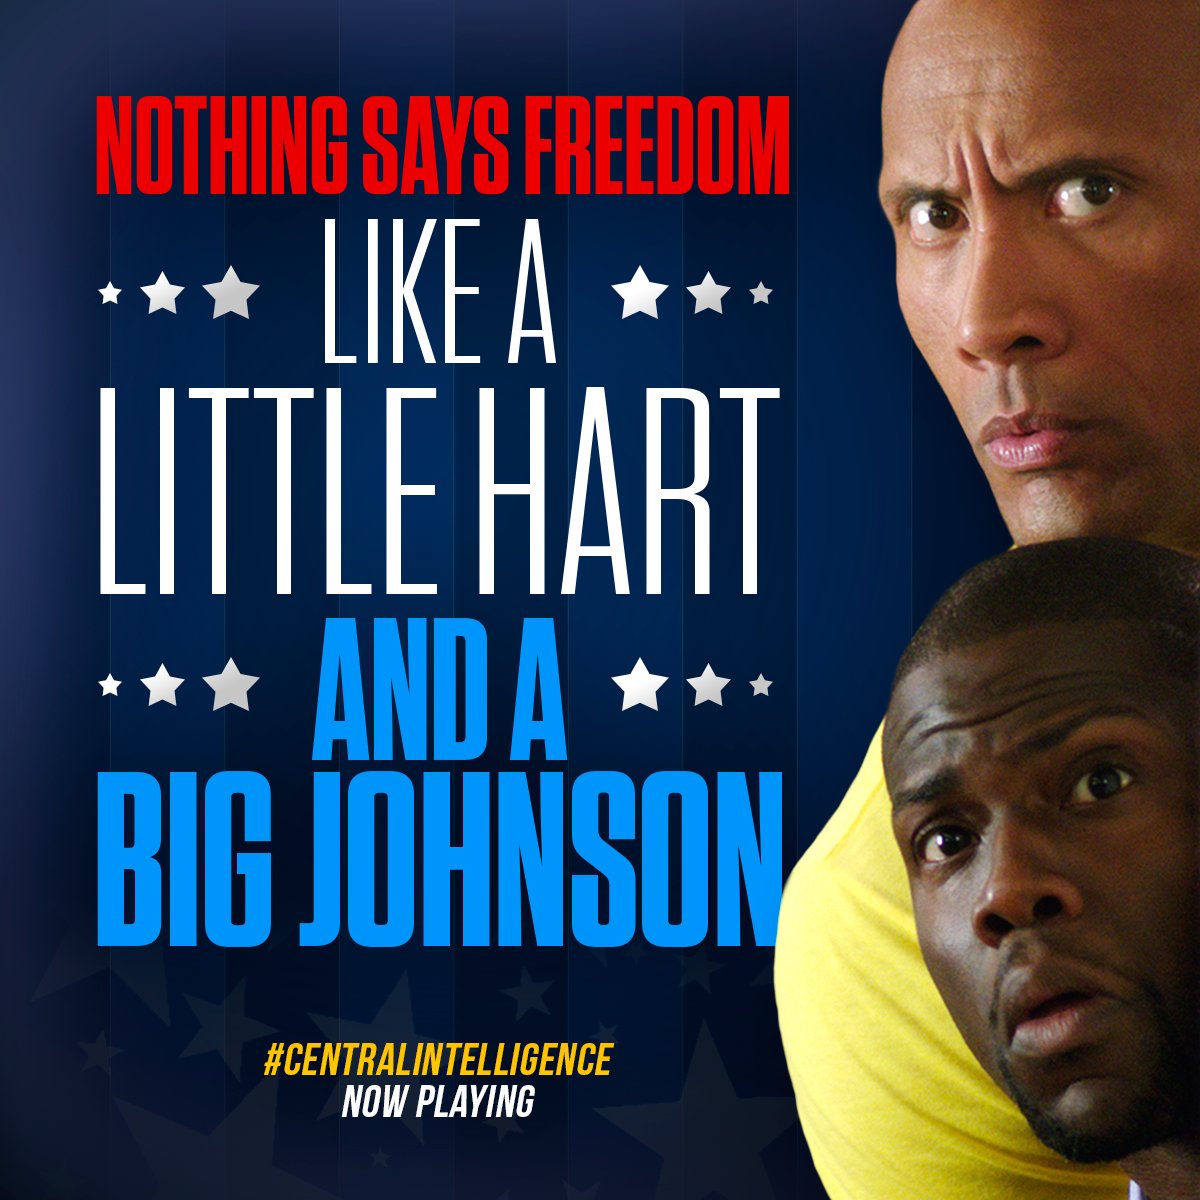 RT @CentralIntel: Spend your 4th of July with @TheRock & @KevinHart4Real. #CentralIntelligence is NOW PLAYING! https://t.co/AZqQrEdApU http…